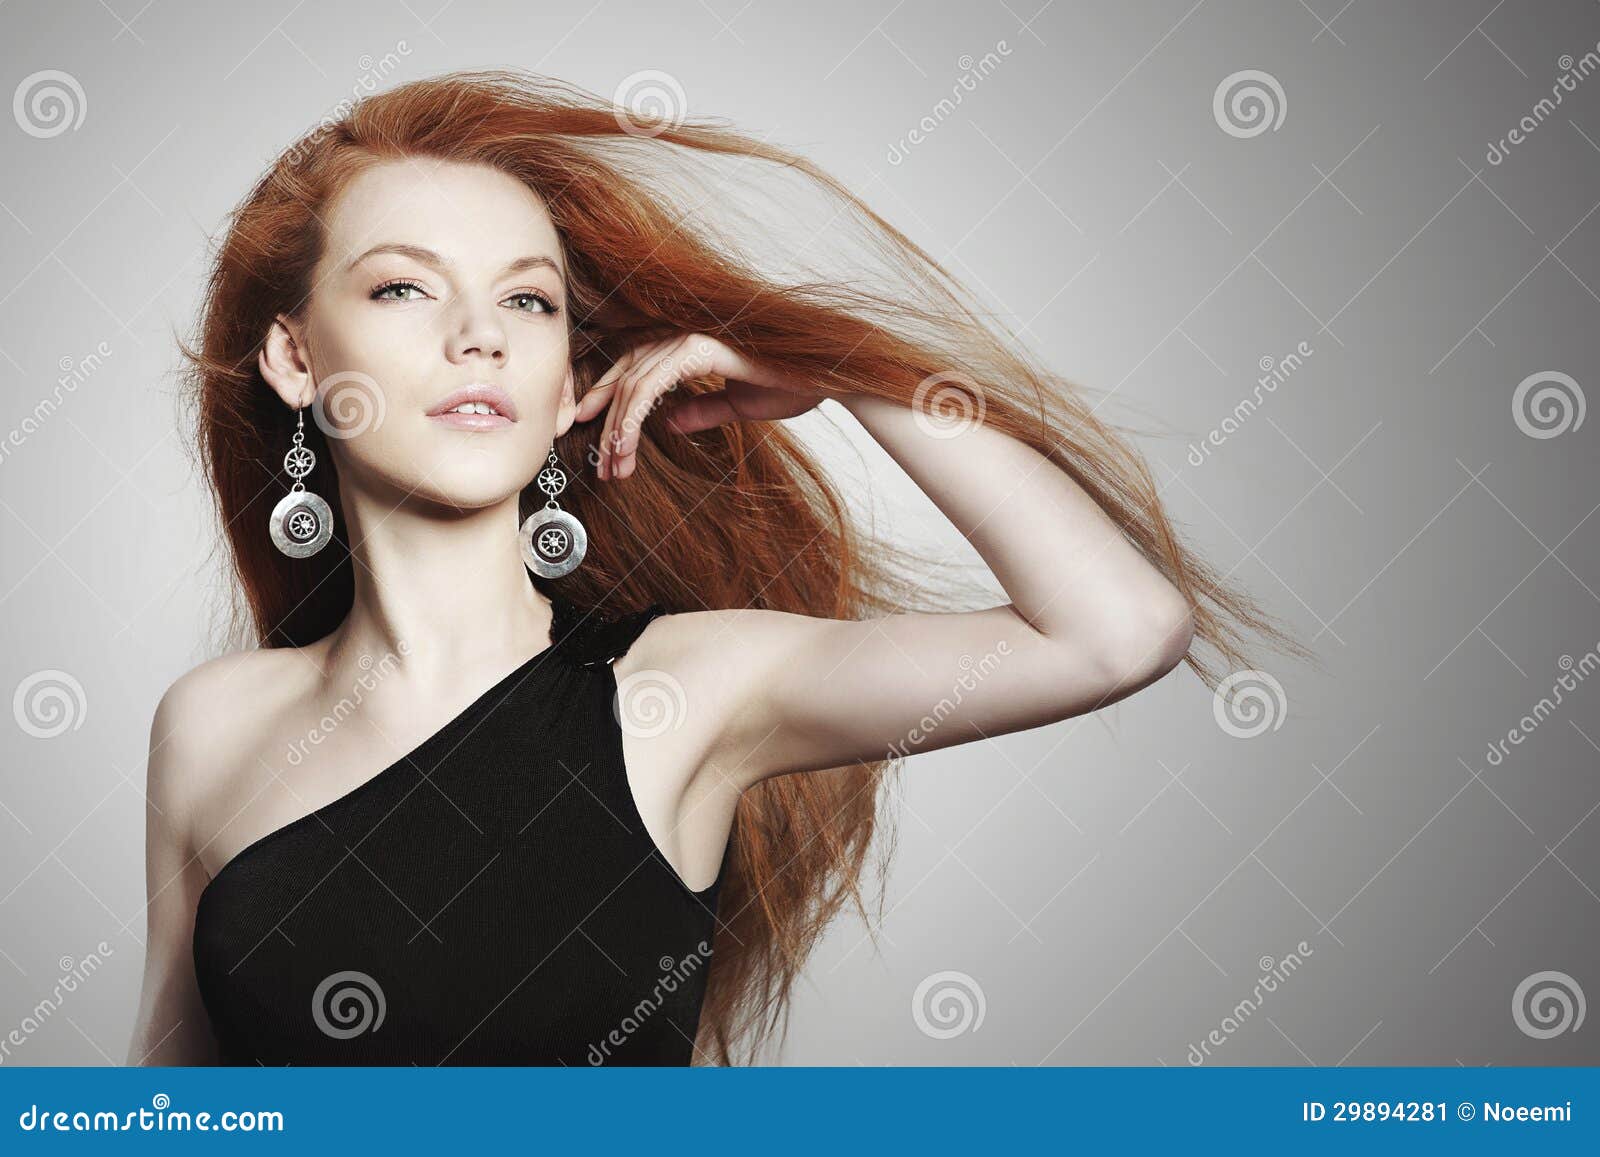 young woman with scatter red hair